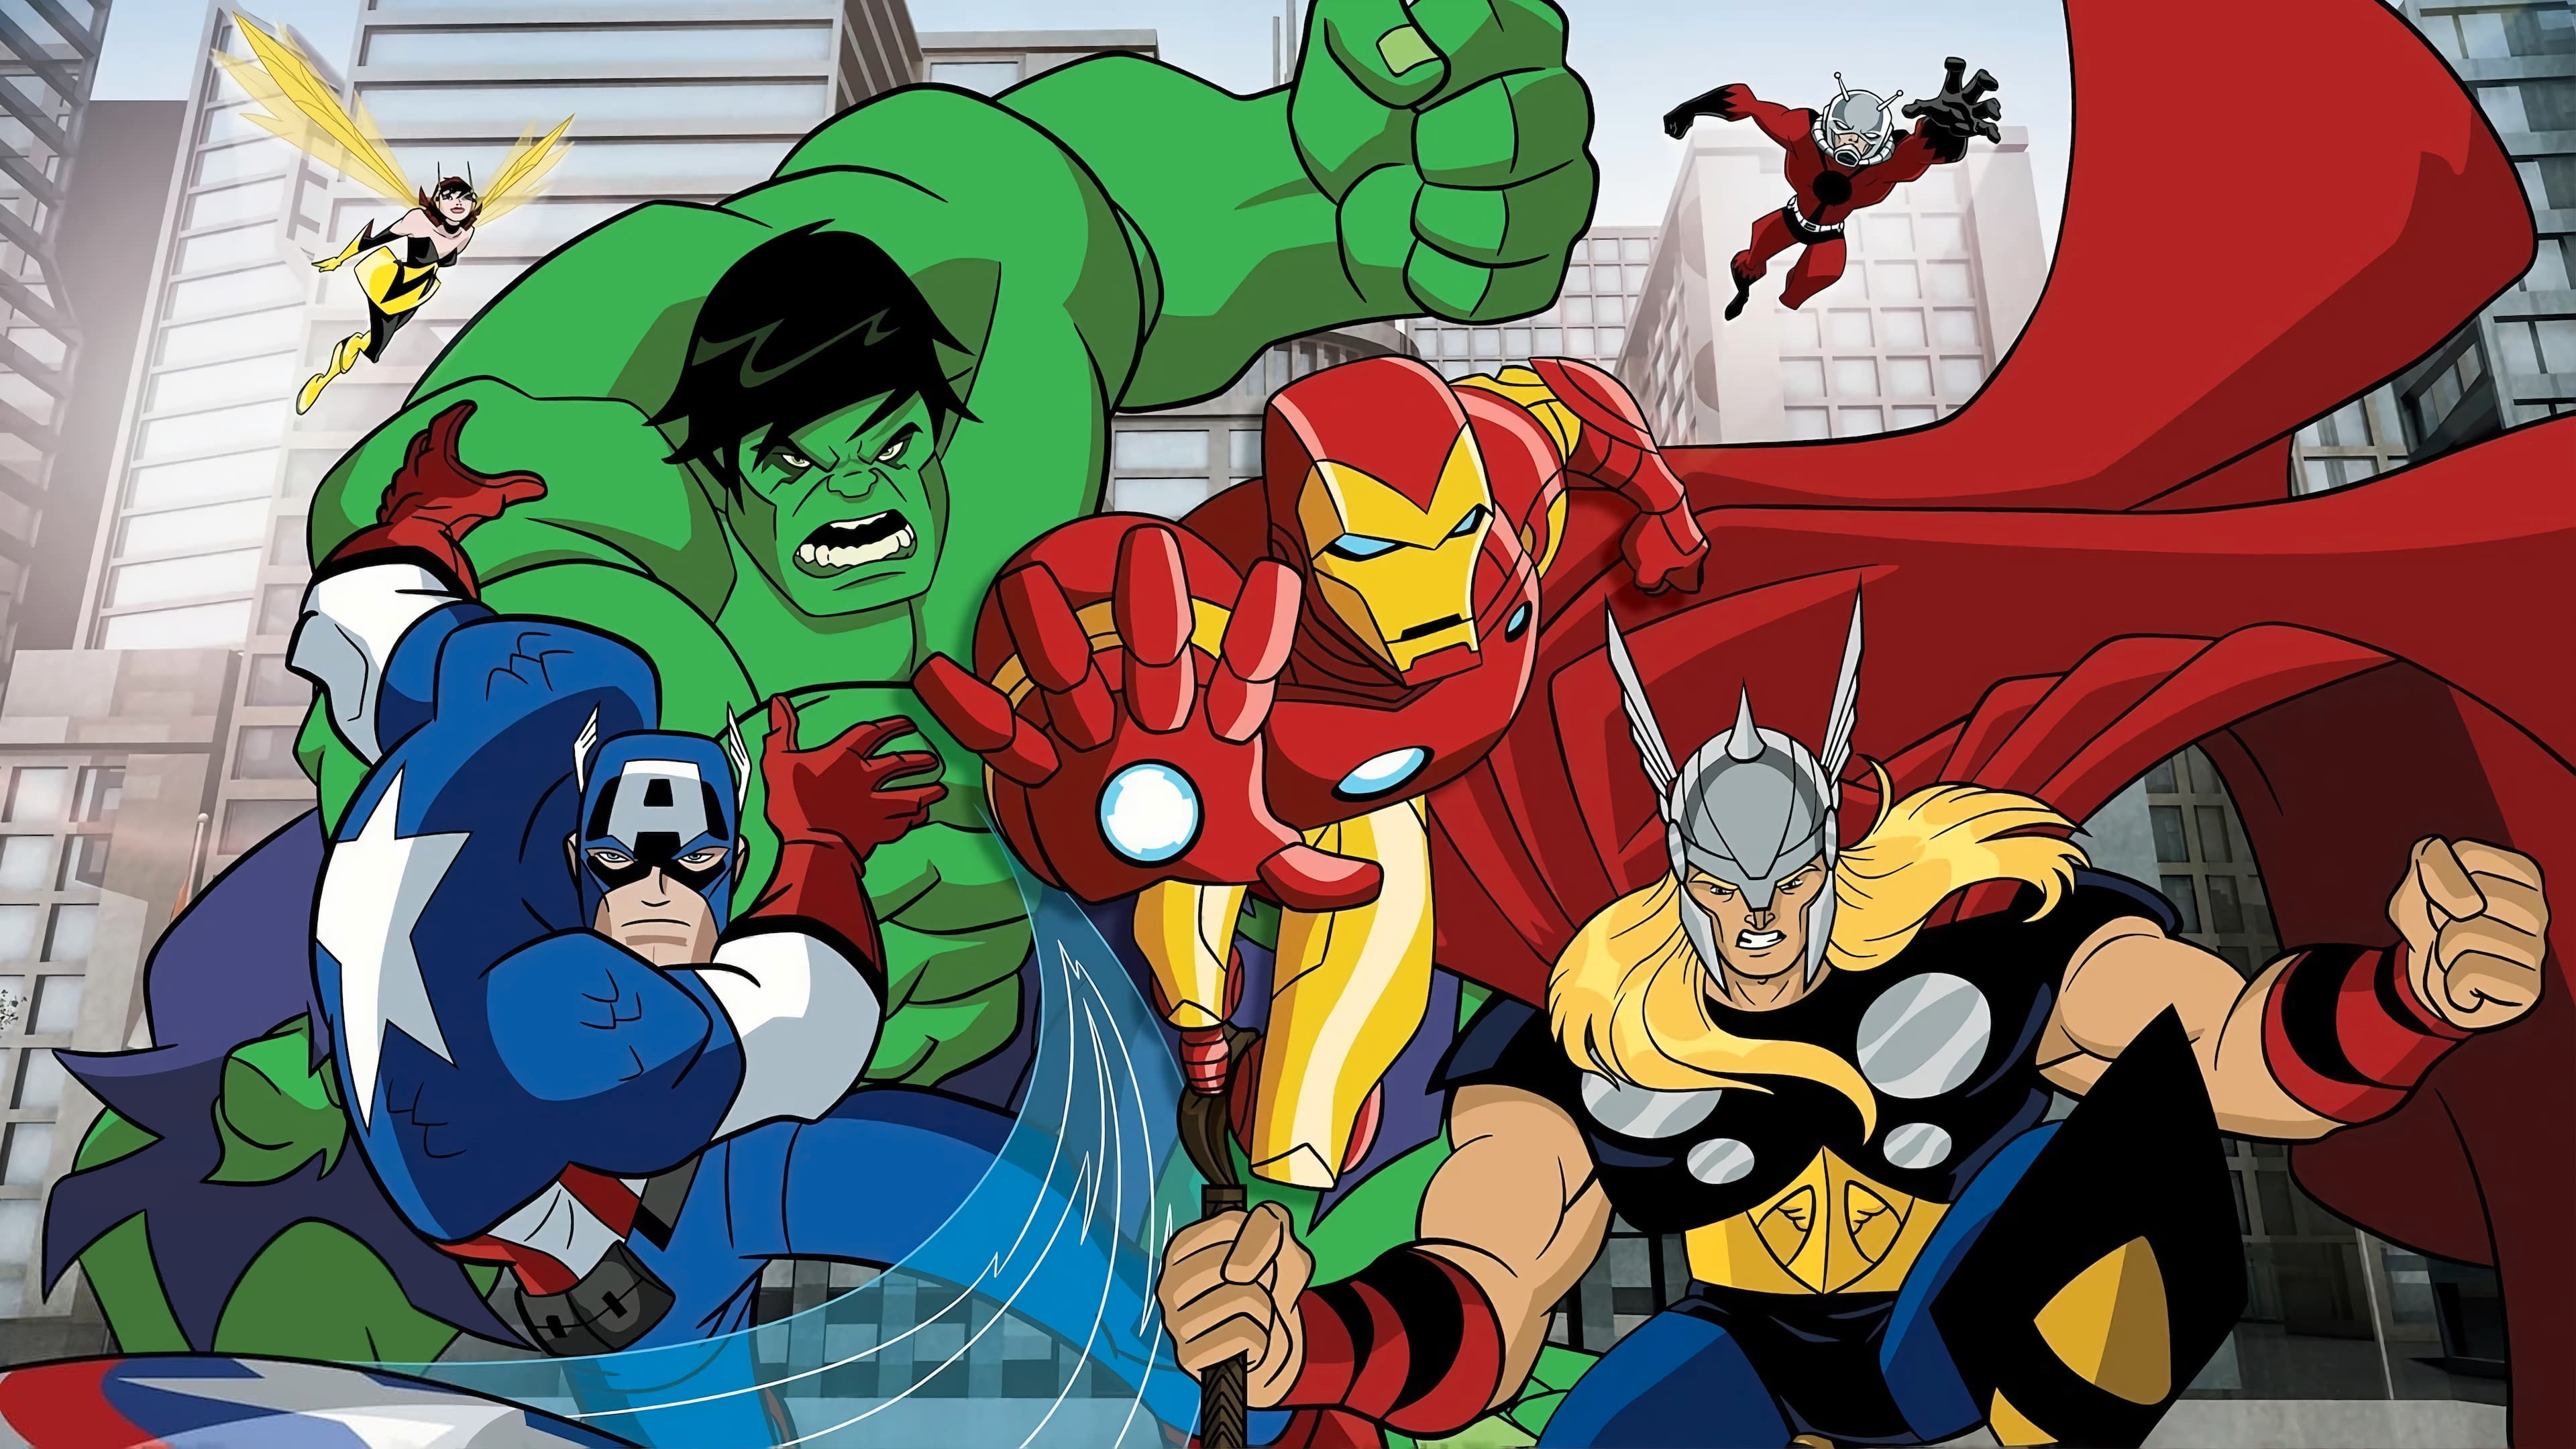 Epic wallpaper featuring The Avengers: Earth's Mightiest Heroes cast, ready for action in high-definition quality.